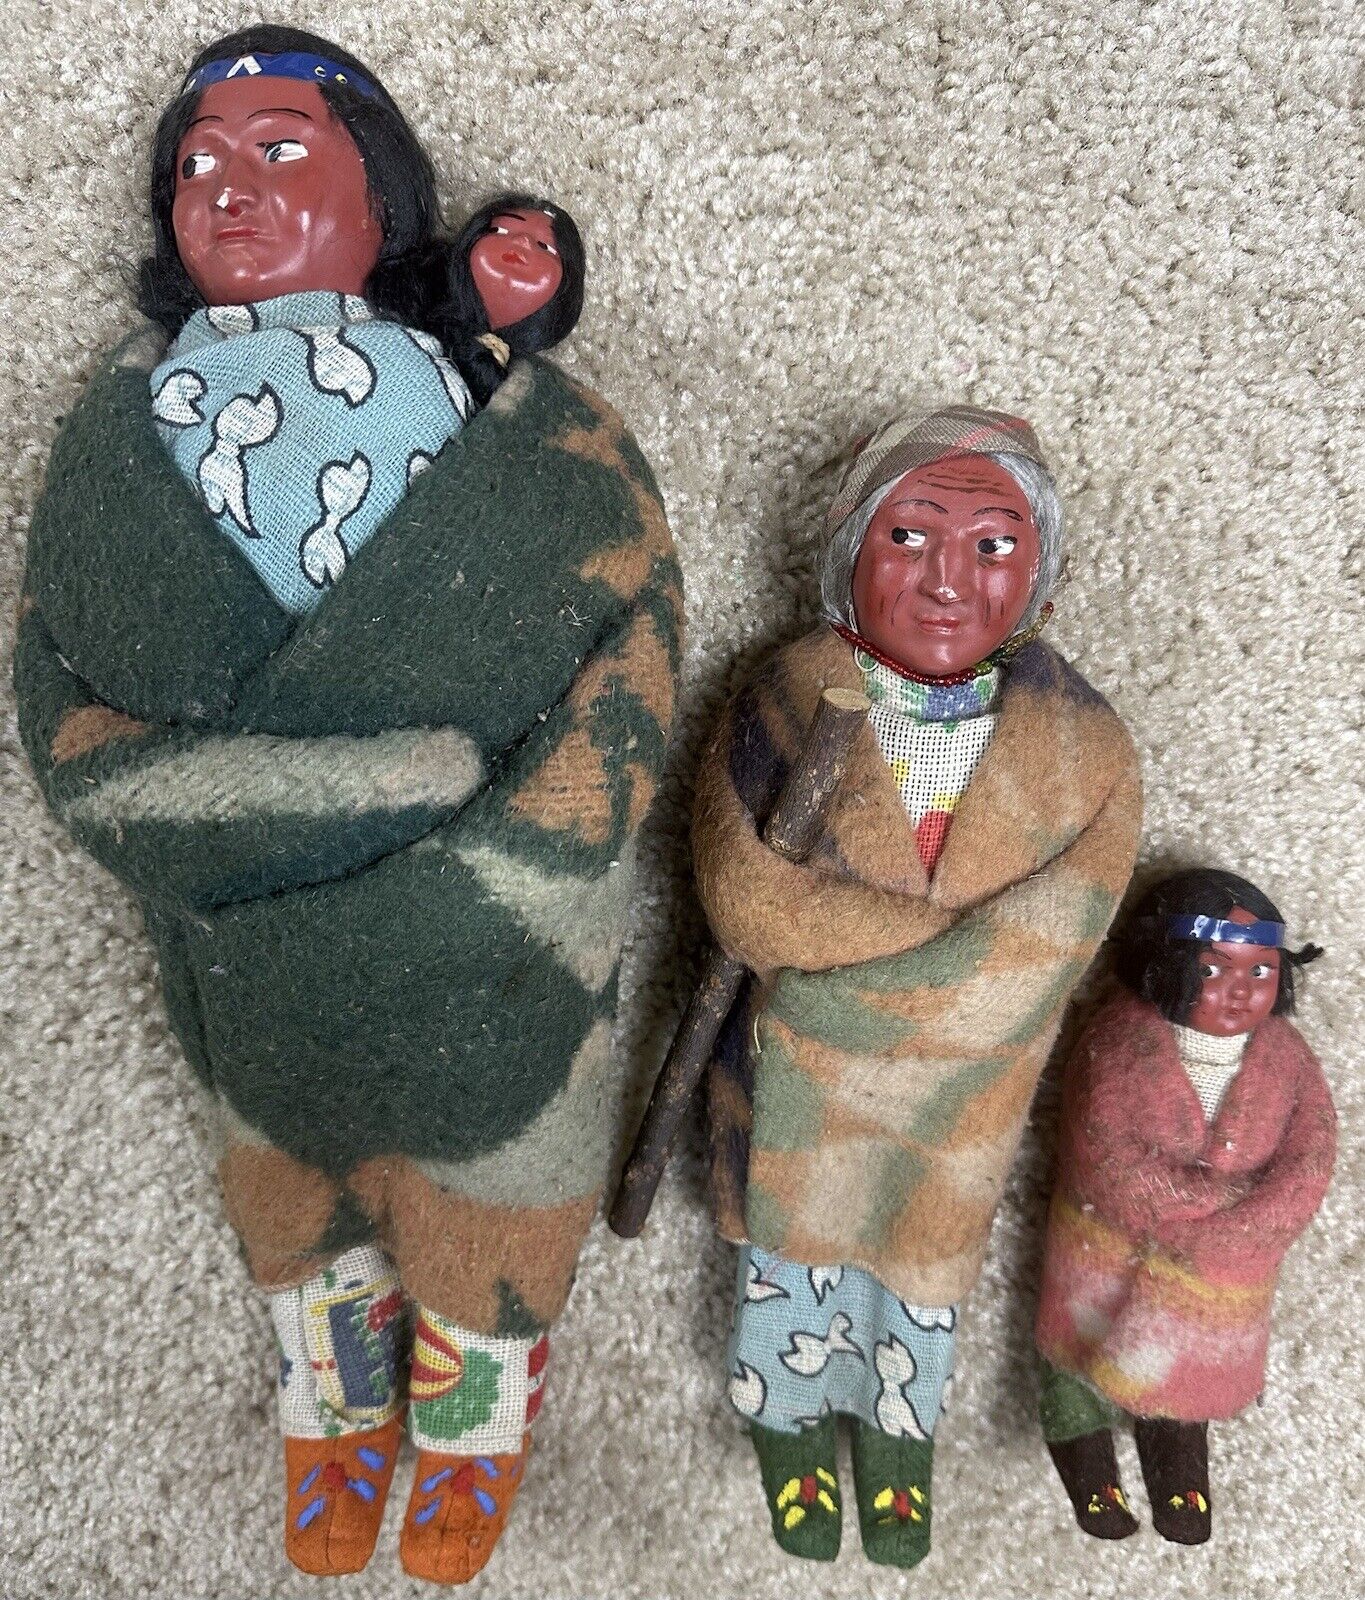 Vintage Skookum Native American Chinook Indian Dolls 15”w/Papoose Baby Lot Of 3